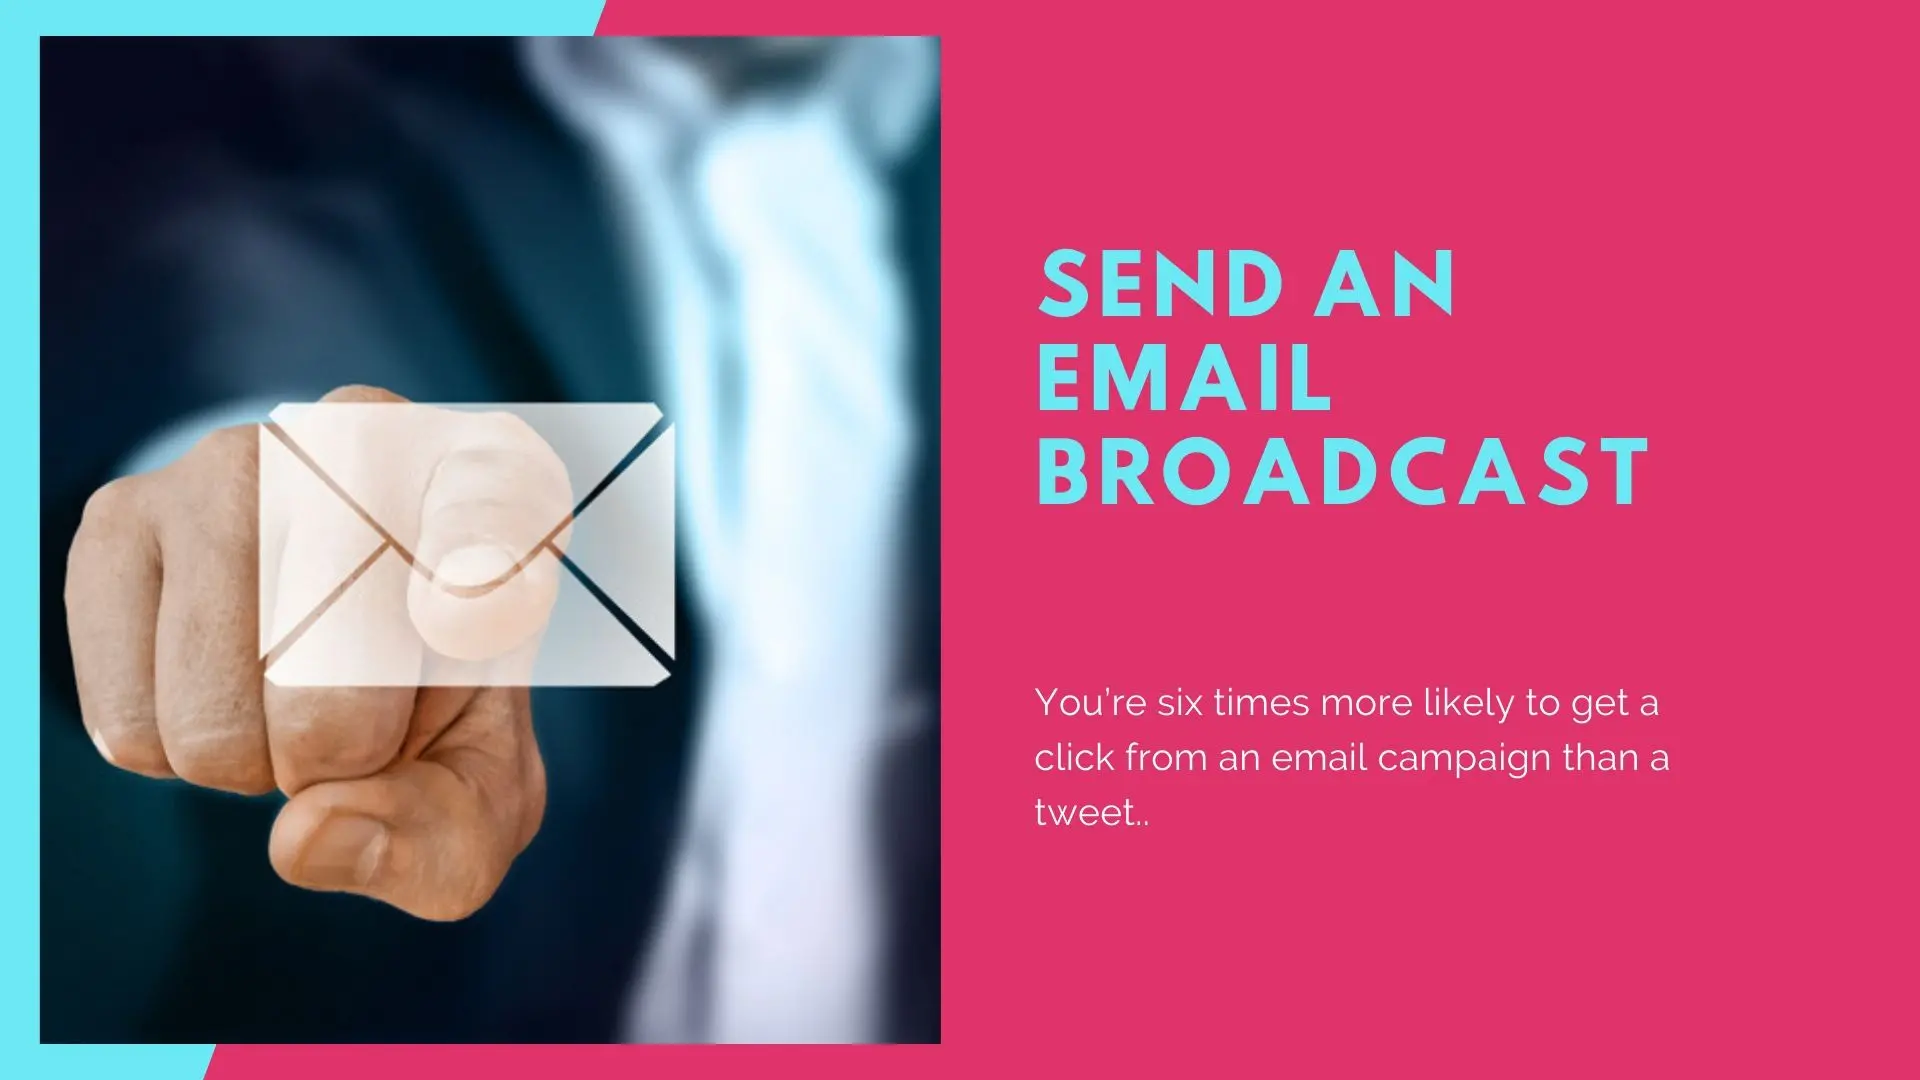 Content - Send an email broadcast